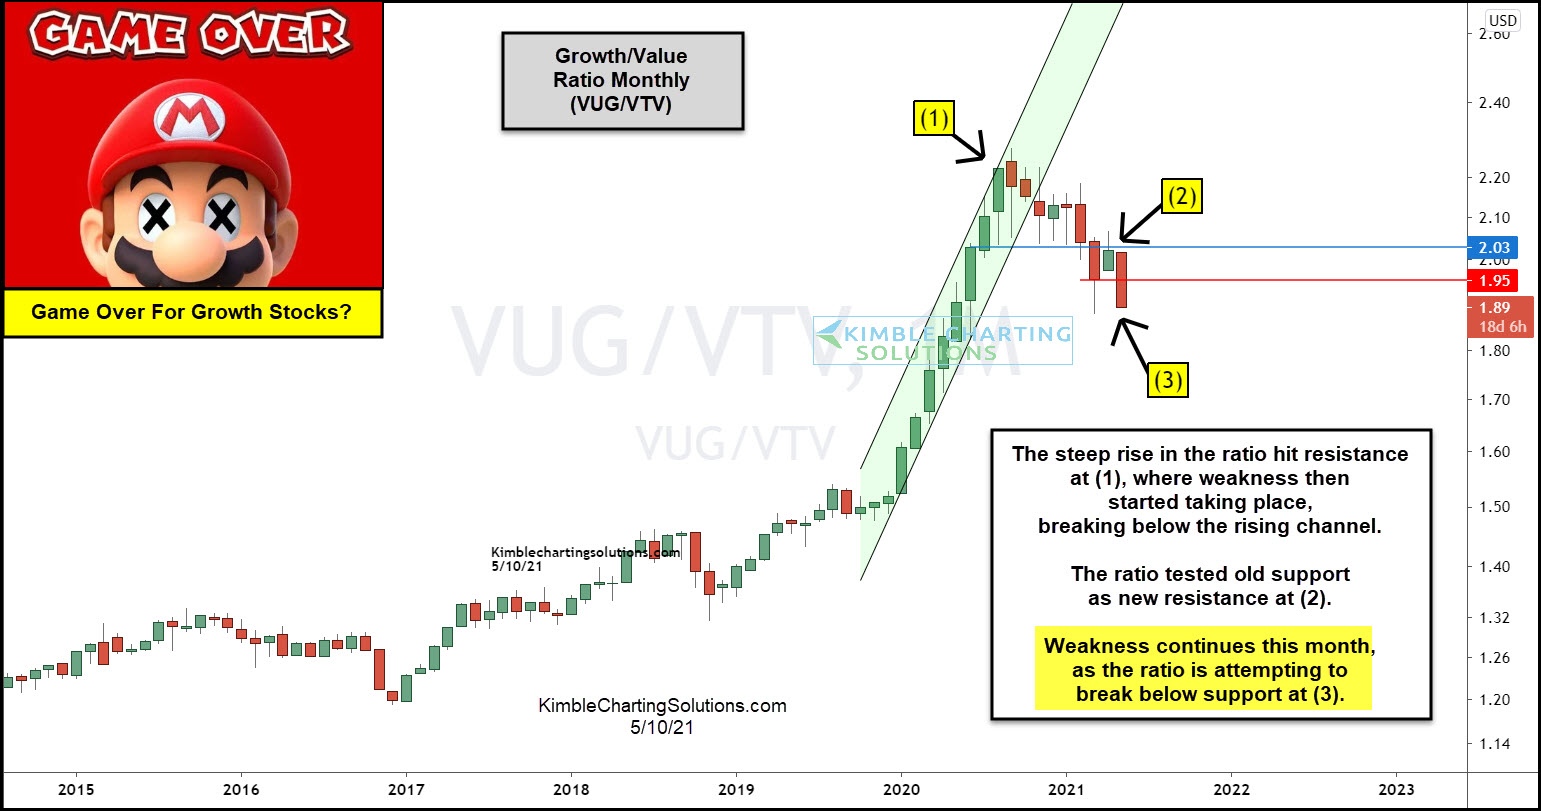 Growth/Value Ratio Monthly Chart